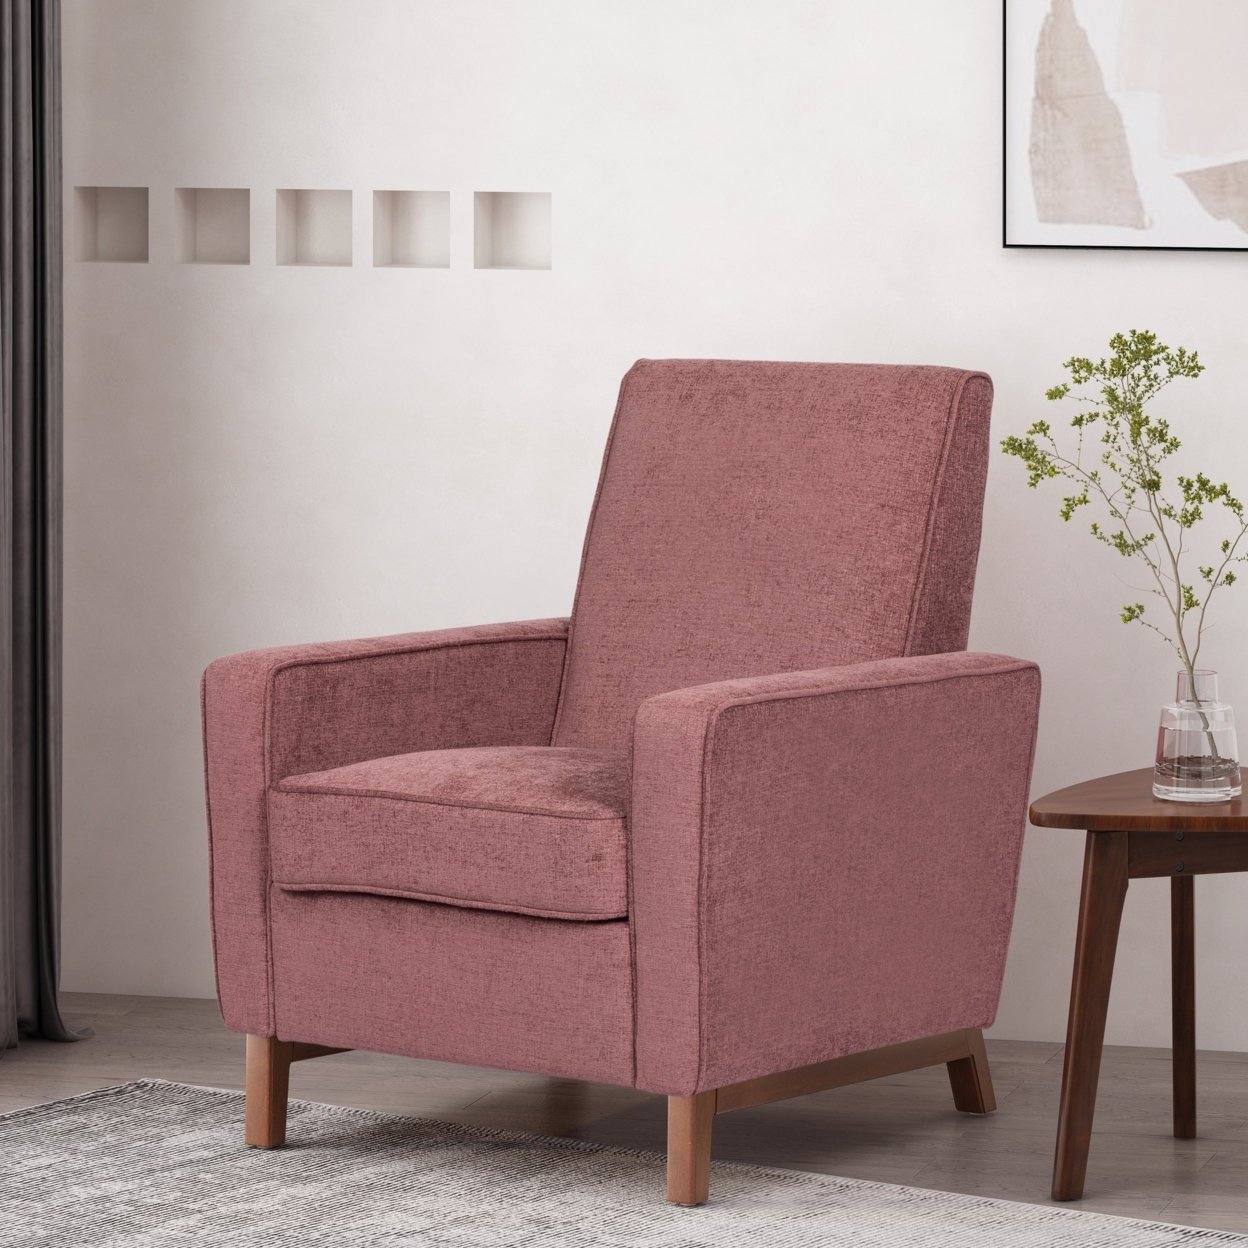 Haston Contemporary Upholstered Club Chair - Rose